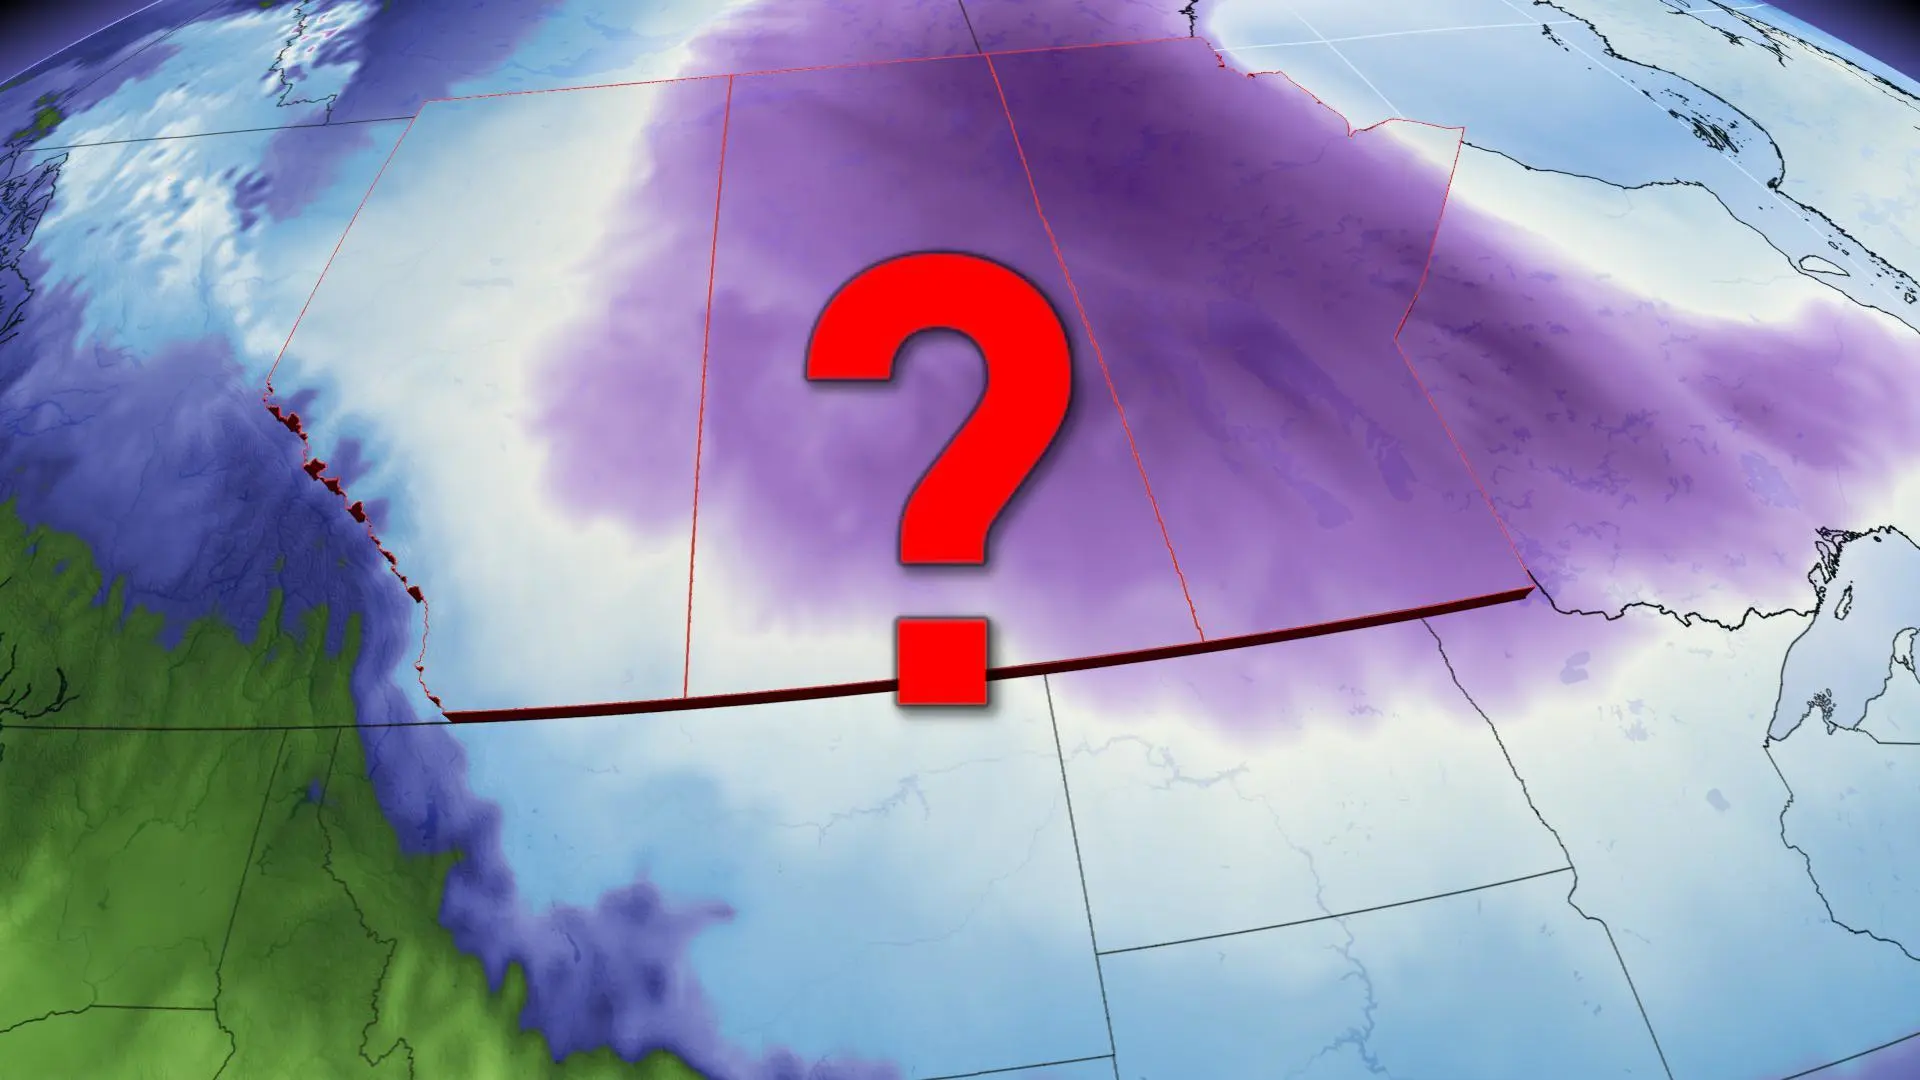 Strongest cold anomaly on the planet located in Alberta